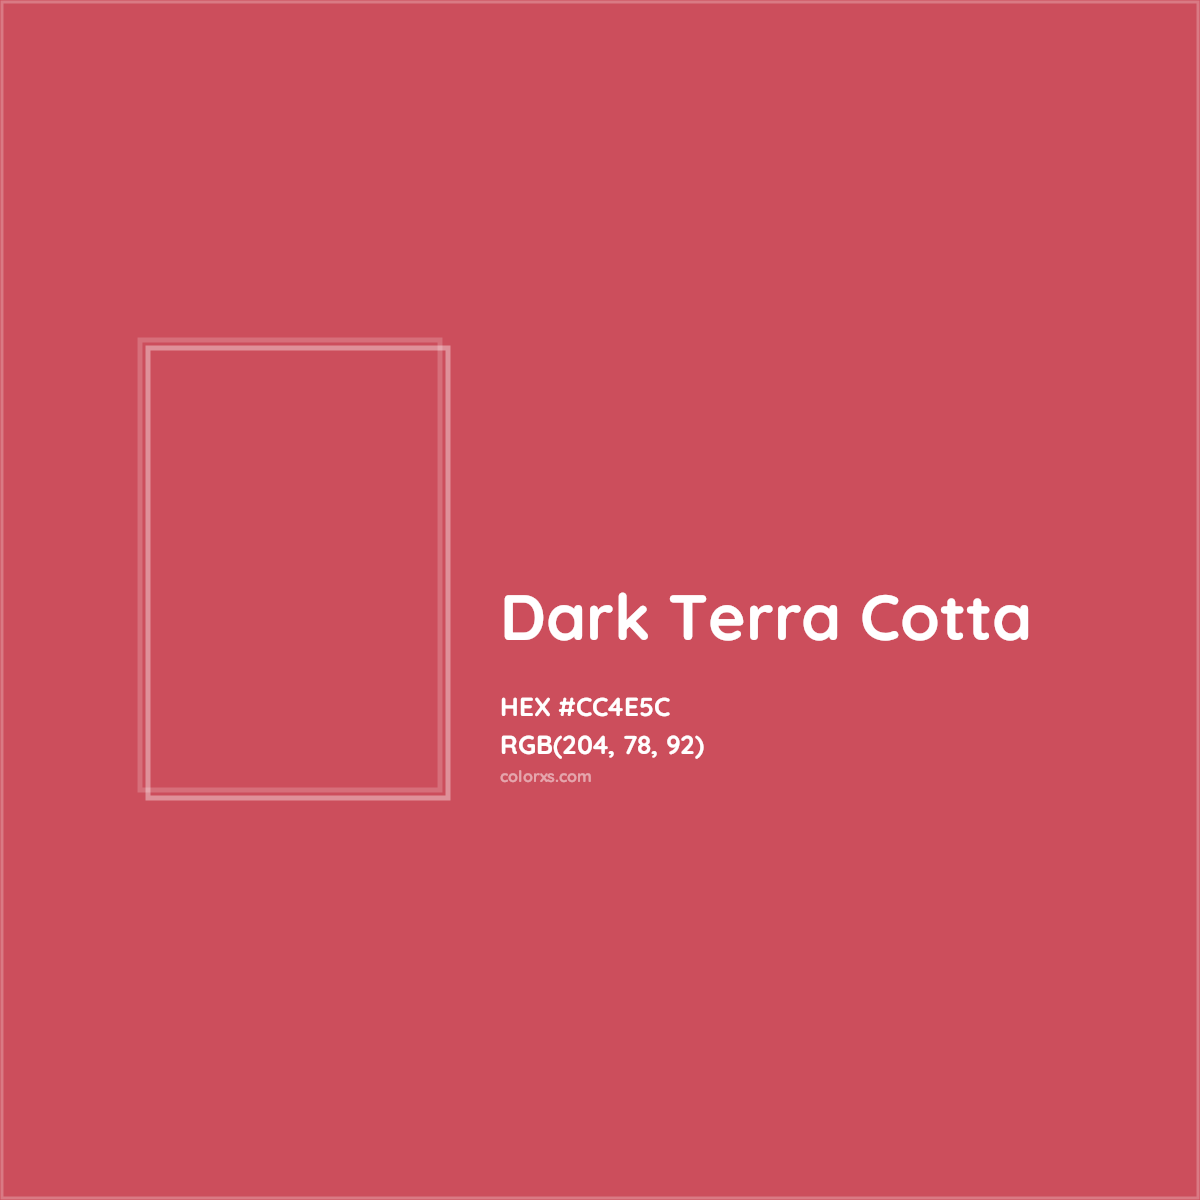 About Dark Terra Cotta - Color codes, similar colors and paints